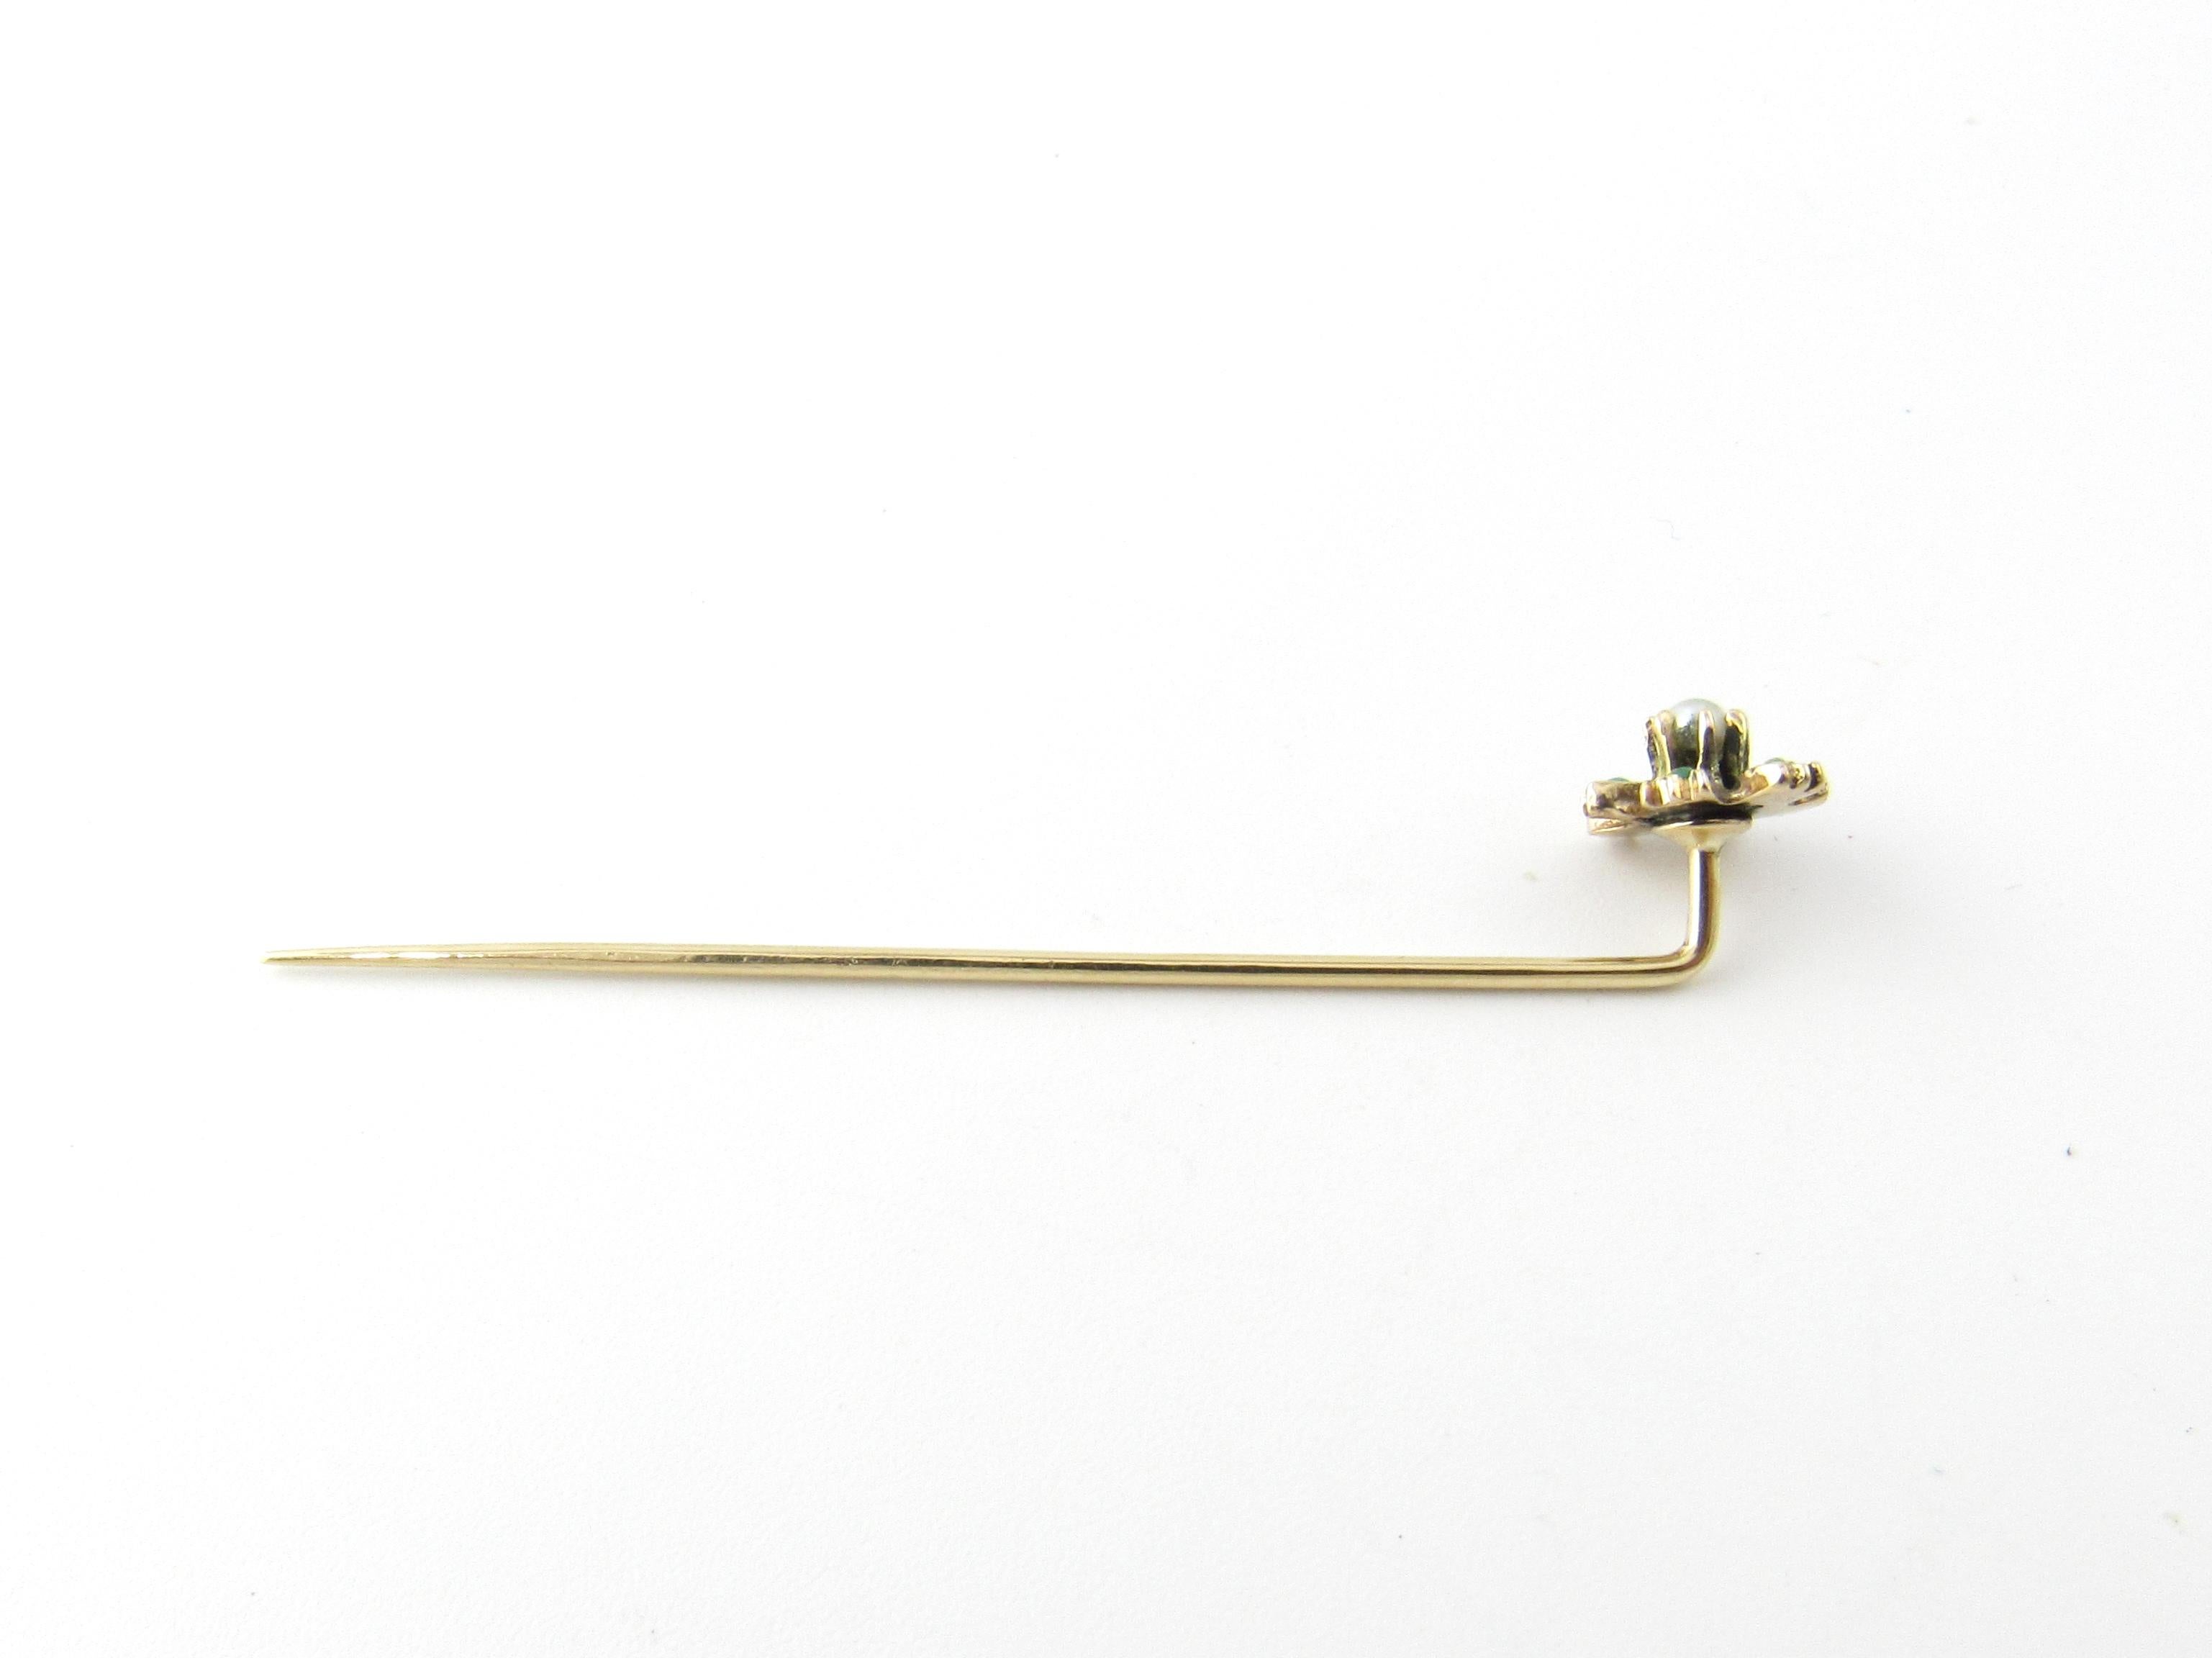 Vintage 14 Karat Yellow Gold Turquoise and Seed Pearl Stick Pin

This elegant stick pin features a beautifully detailed flower (8 mm) decorated with six blue turquoise stones and one 2 mm seed pearl set in classic 14K yellow gold.

Size: 50 mm x 8